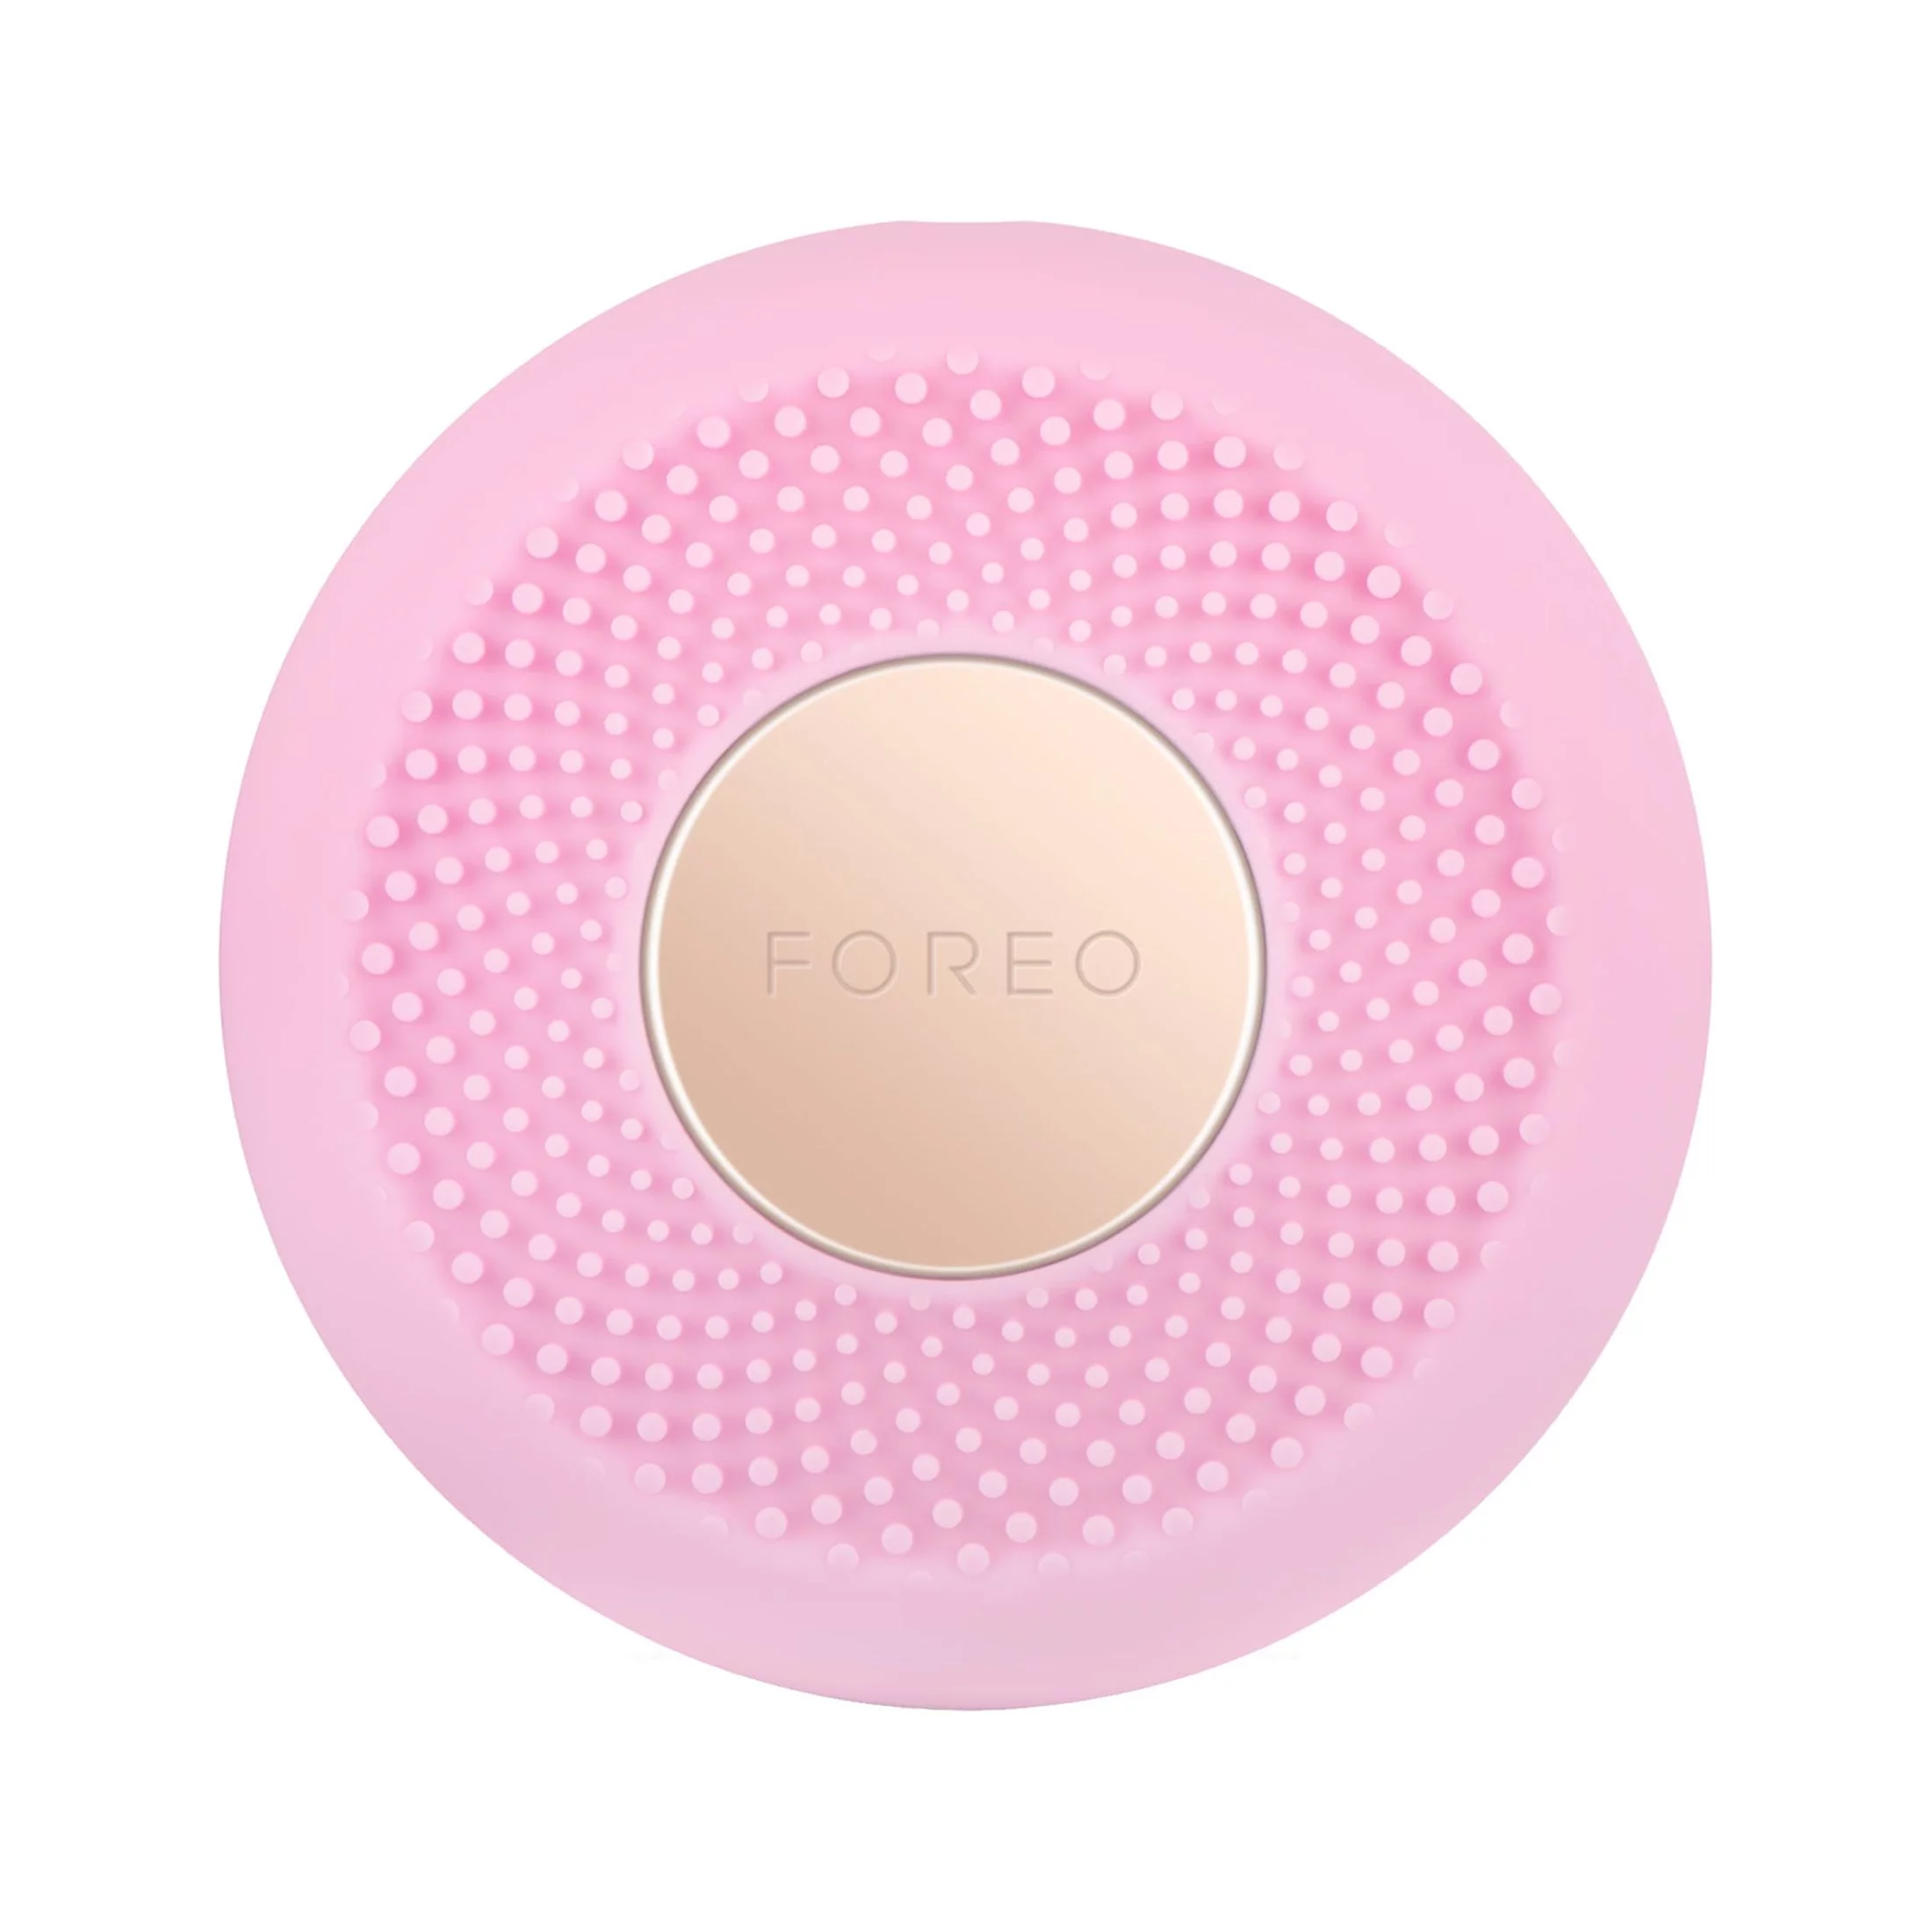 Foreo Skin Care UFO Mini Facial Cleansing Brush Massager and Exfoliator, Pink